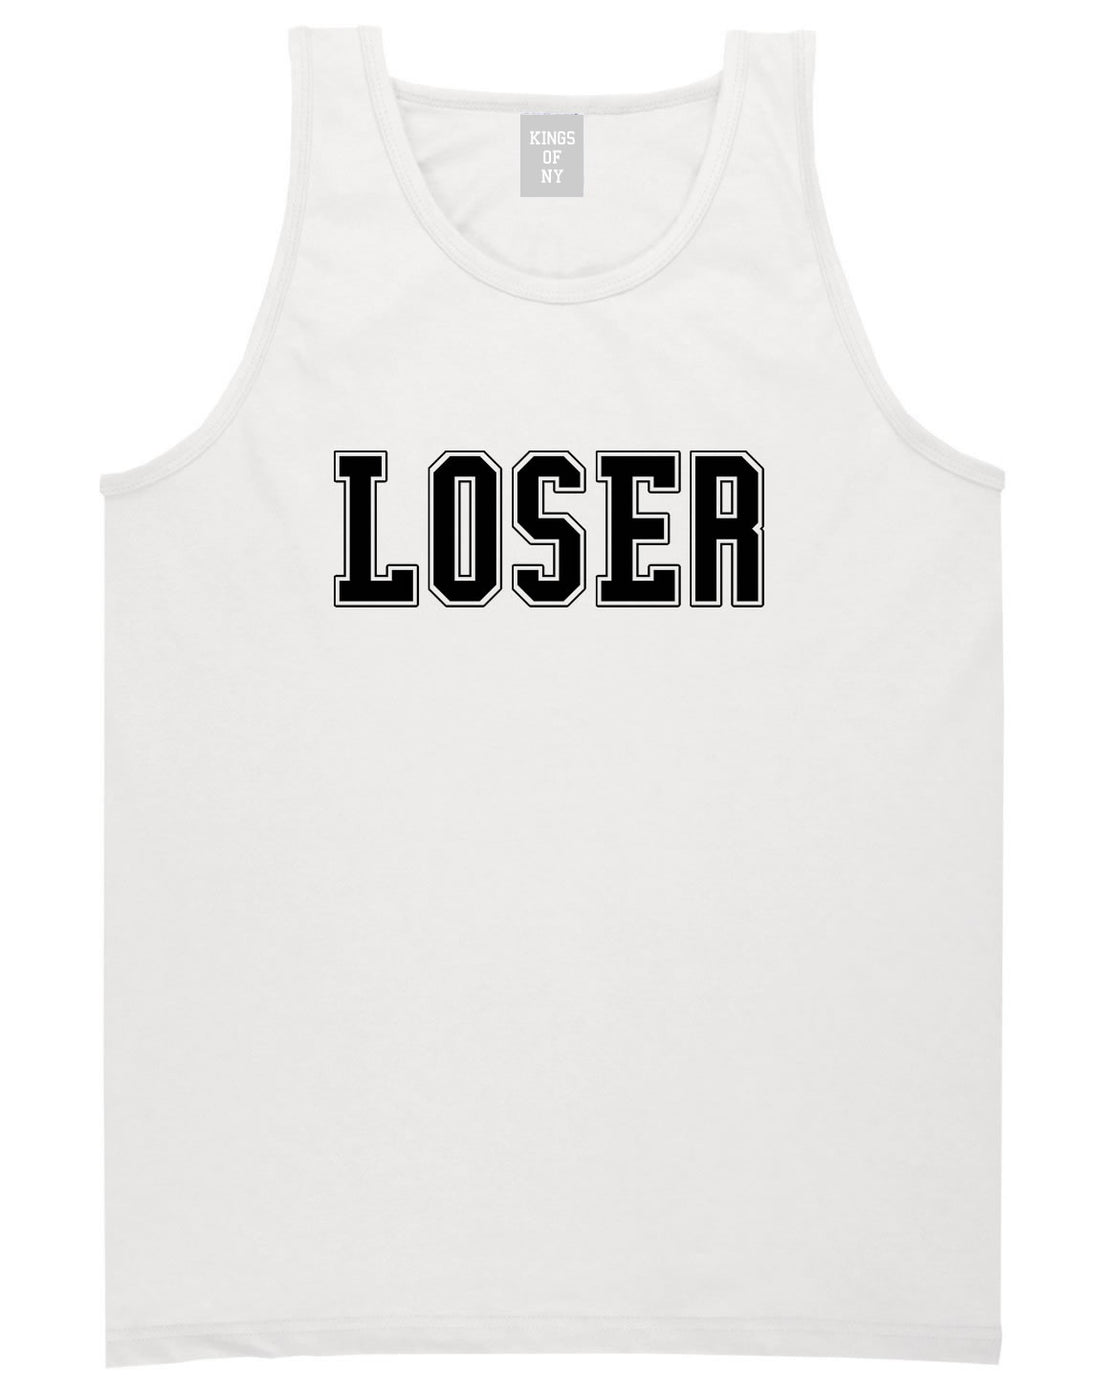 Loser College Style Tank Top in White By Kings Of NY